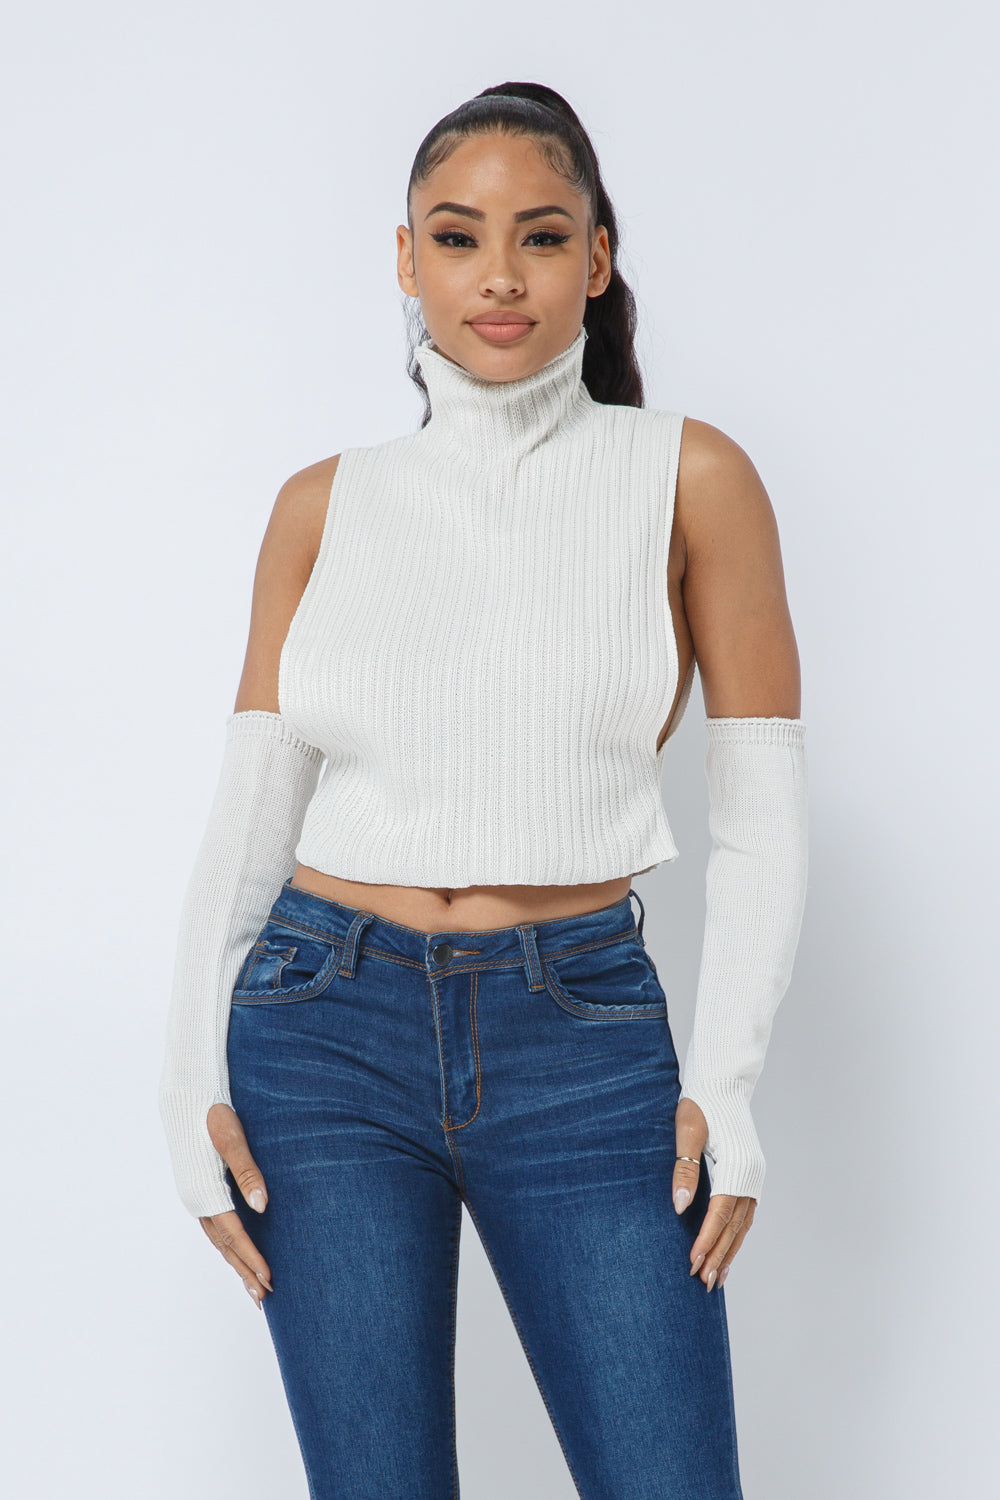 Knit Turtle Neck Sleeveless Top and Arm Sleeves